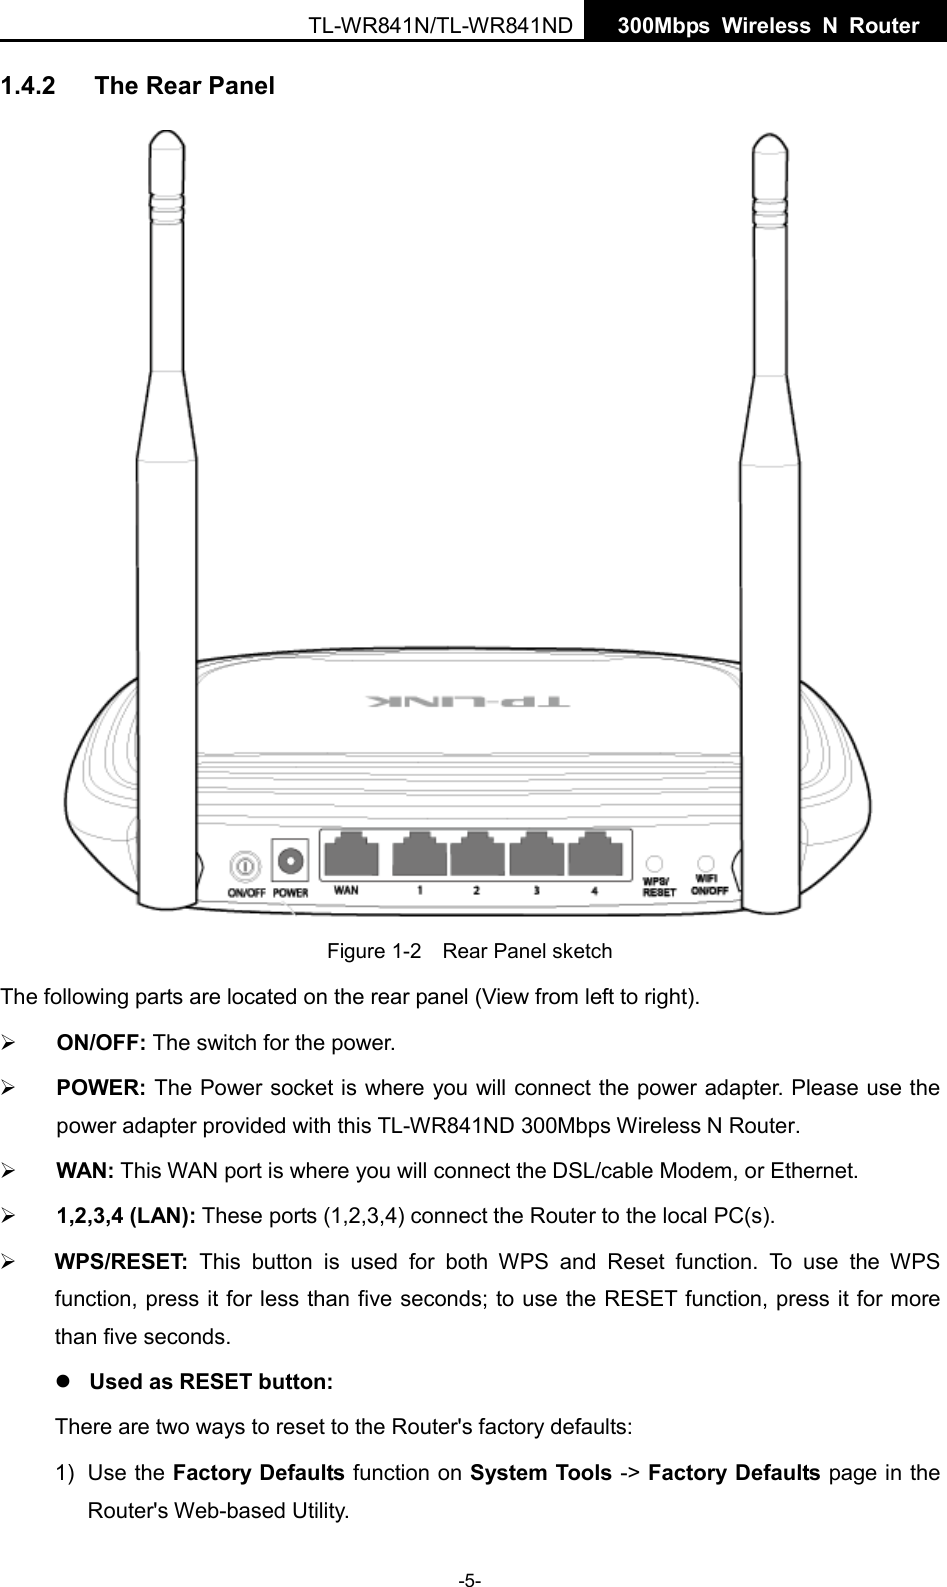  TL-WR841N/TL-WR841ND  300Mbps Wireless N  Router    1.4.2 The Rear Panel  Figure 1-2    Rear Panel sketch The following parts are located on the rear panel (View from left to right).  ON/OFF: The switch for the power.  POWER: The Power socket is where you will connect the power adapter. Please use the power adapter provided with this TL-WR841ND 300Mbps Wireless N Router.  WAN: This WAN port is where you will connect the DSL/cable Modem, or Ethernet.  1,2,3,4 (LAN): These ports (1,2,3,4) connect the Router to the local PC(s).  WPS/RESET: This button is used for both WPS and Reset function. To use the WPS function, press it for less than five seconds; to use the RESET function, press it for more than five seconds.    Used as RESET button: There are two ways to reset to the Router&apos;s factory defaults: 1) Use the Factory Defaults function on System Tools -&gt; Factory Defaults page in the Router&apos;s Web-based Utility. -5- 